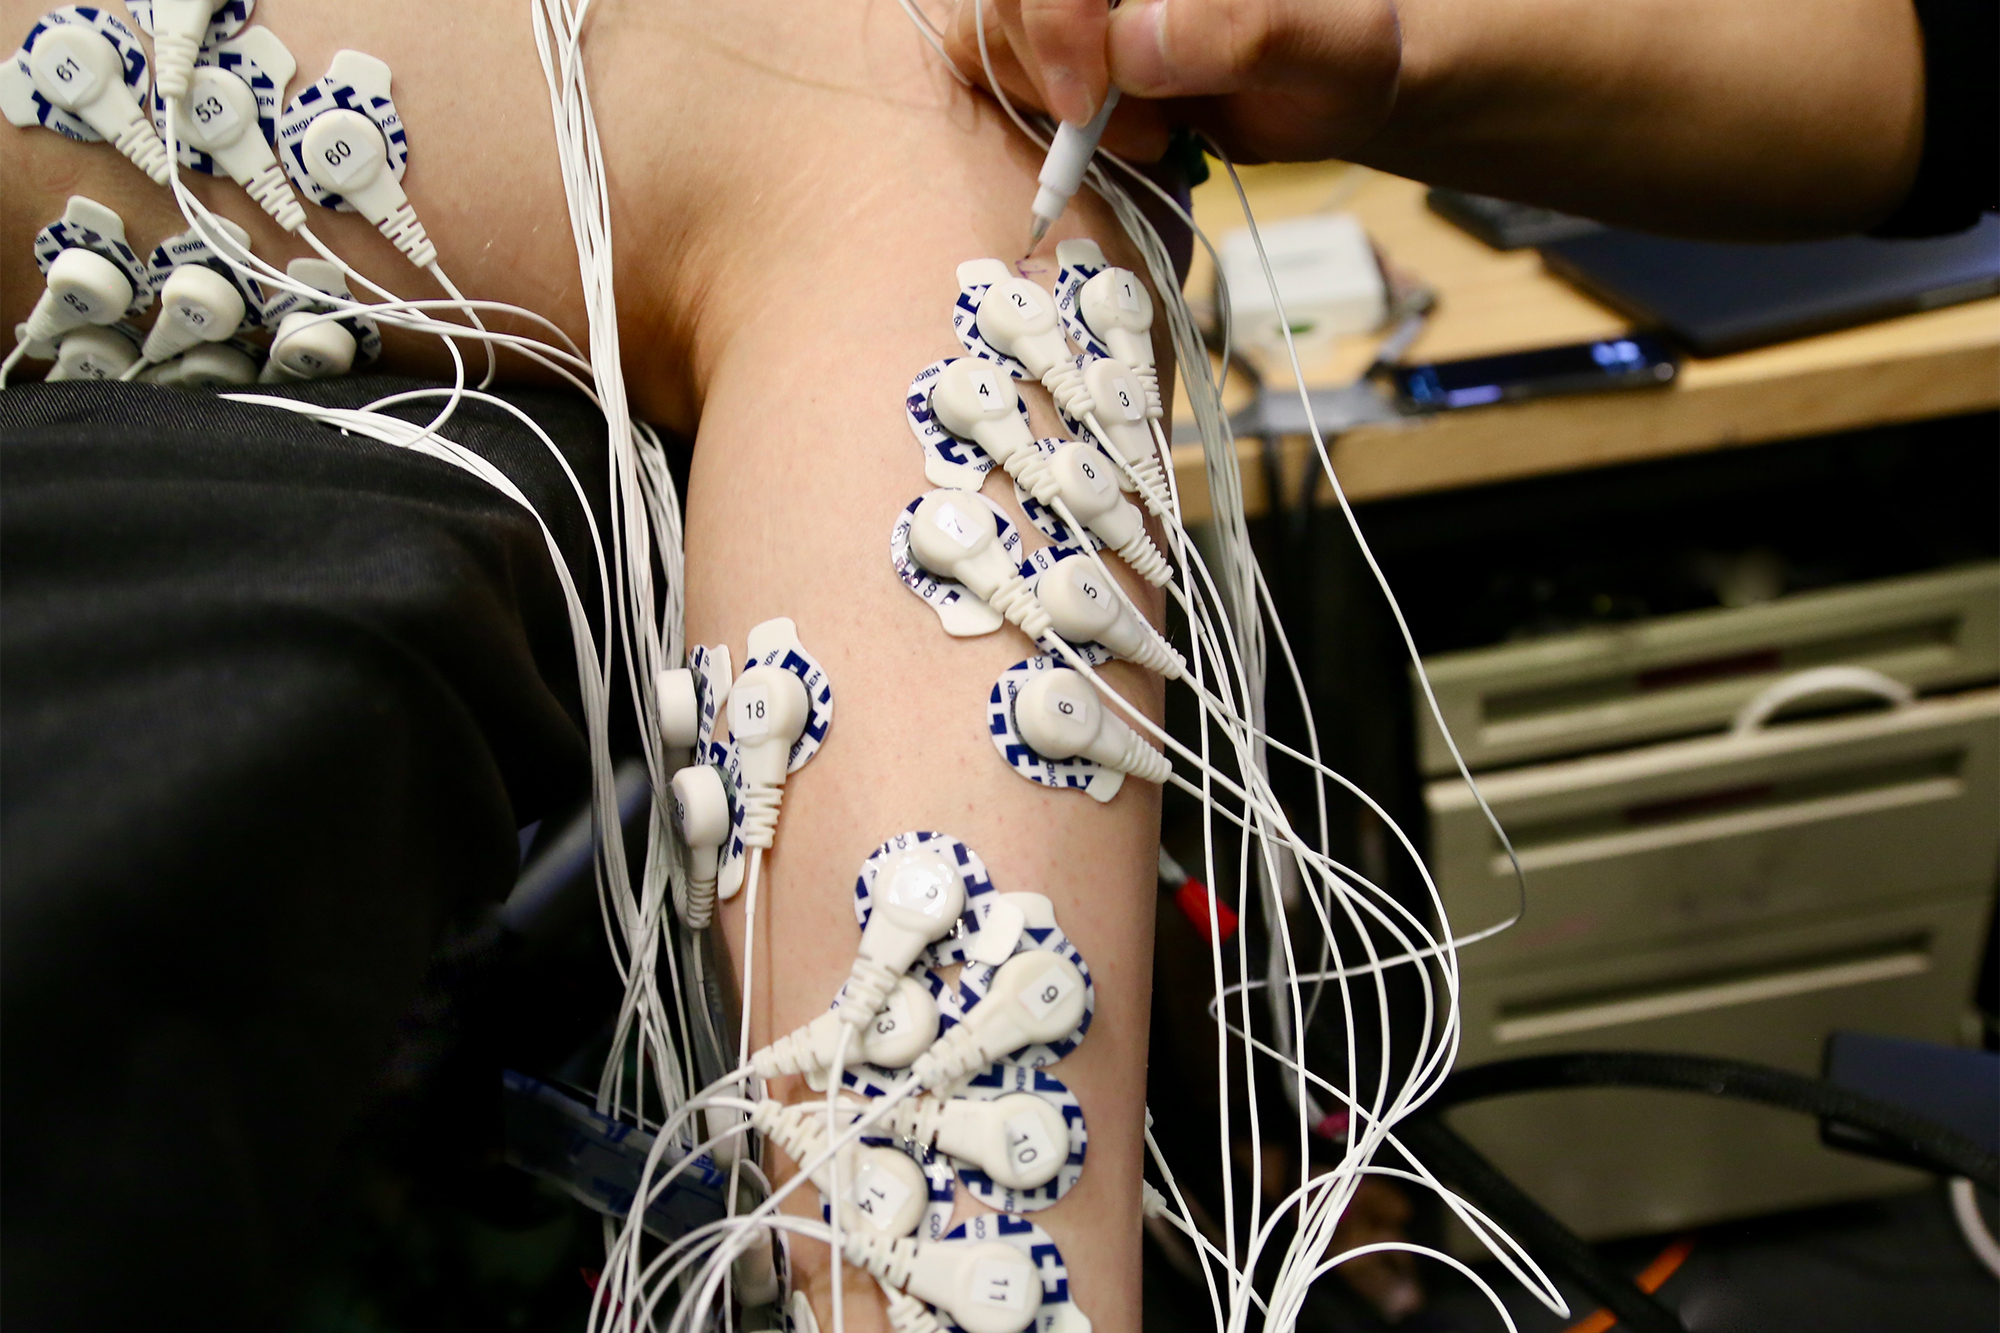 New surgery can enable better control of prosthetic limbs MIT News